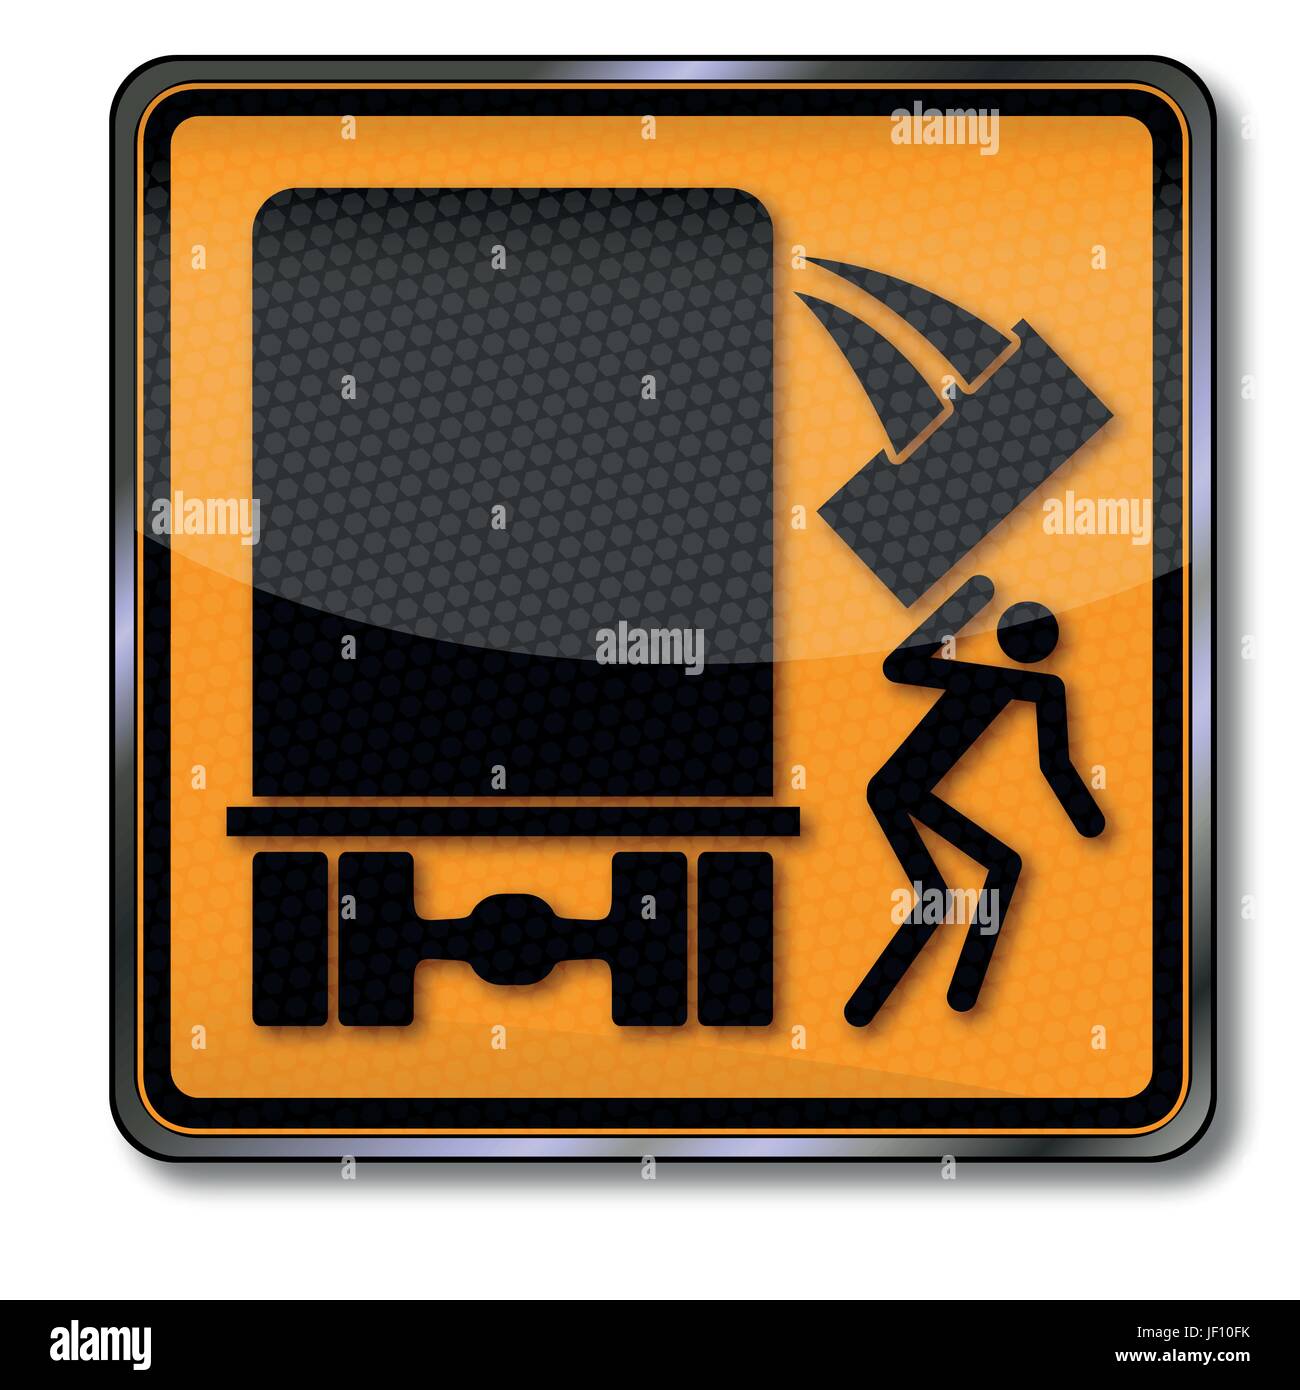 fall, injury, uncertainty, charge, safety margin, bruise, truck, lorry, danger, Stock Vector